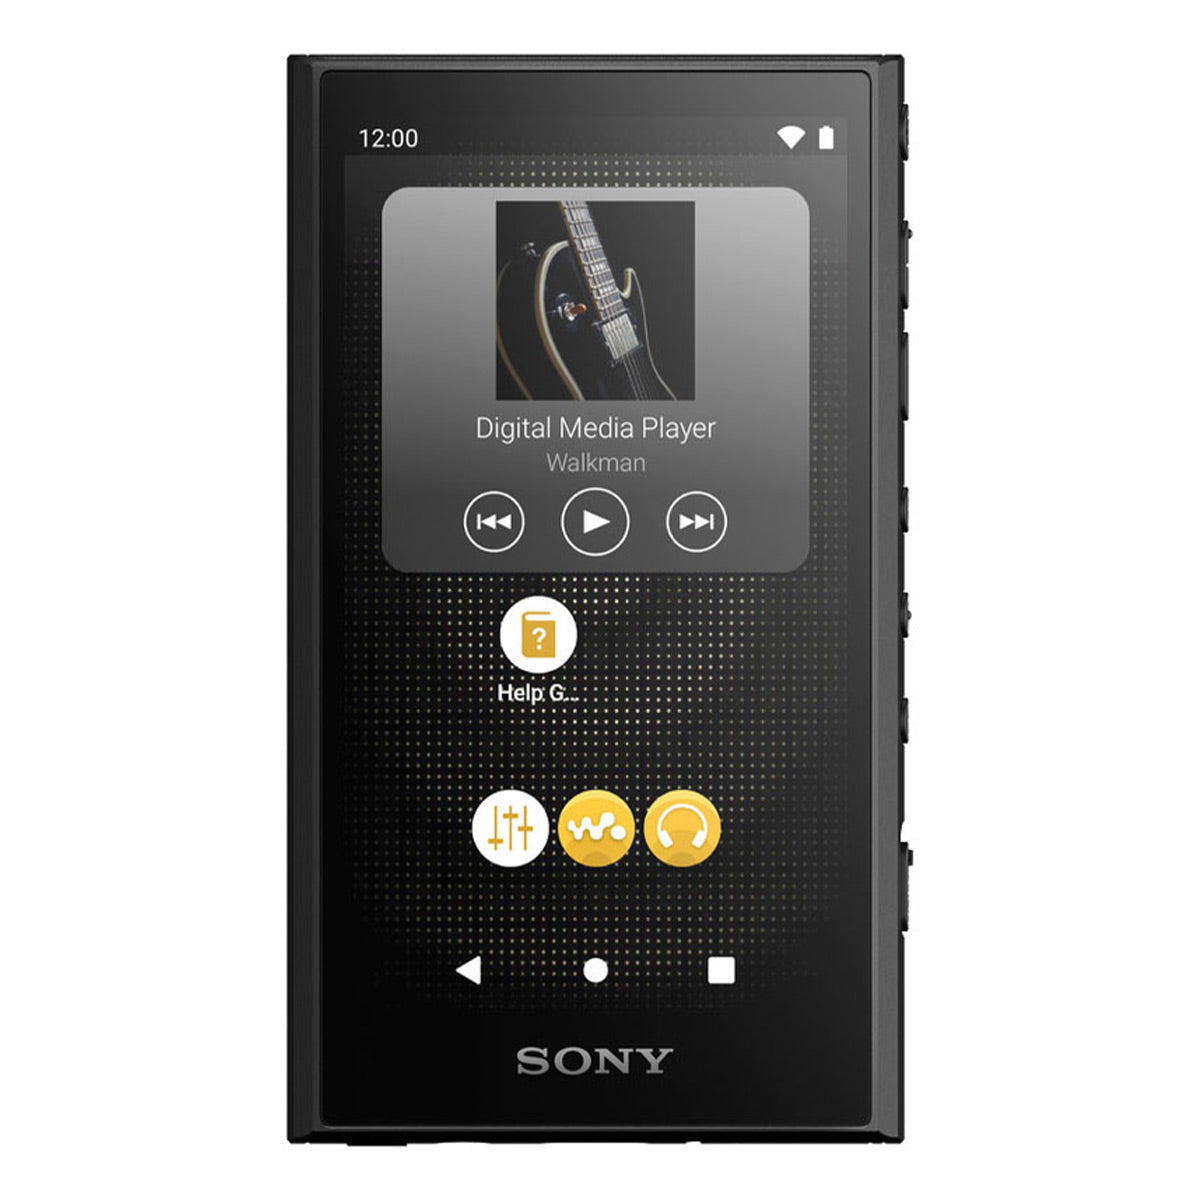 Questions and Answers about Walkman A Series